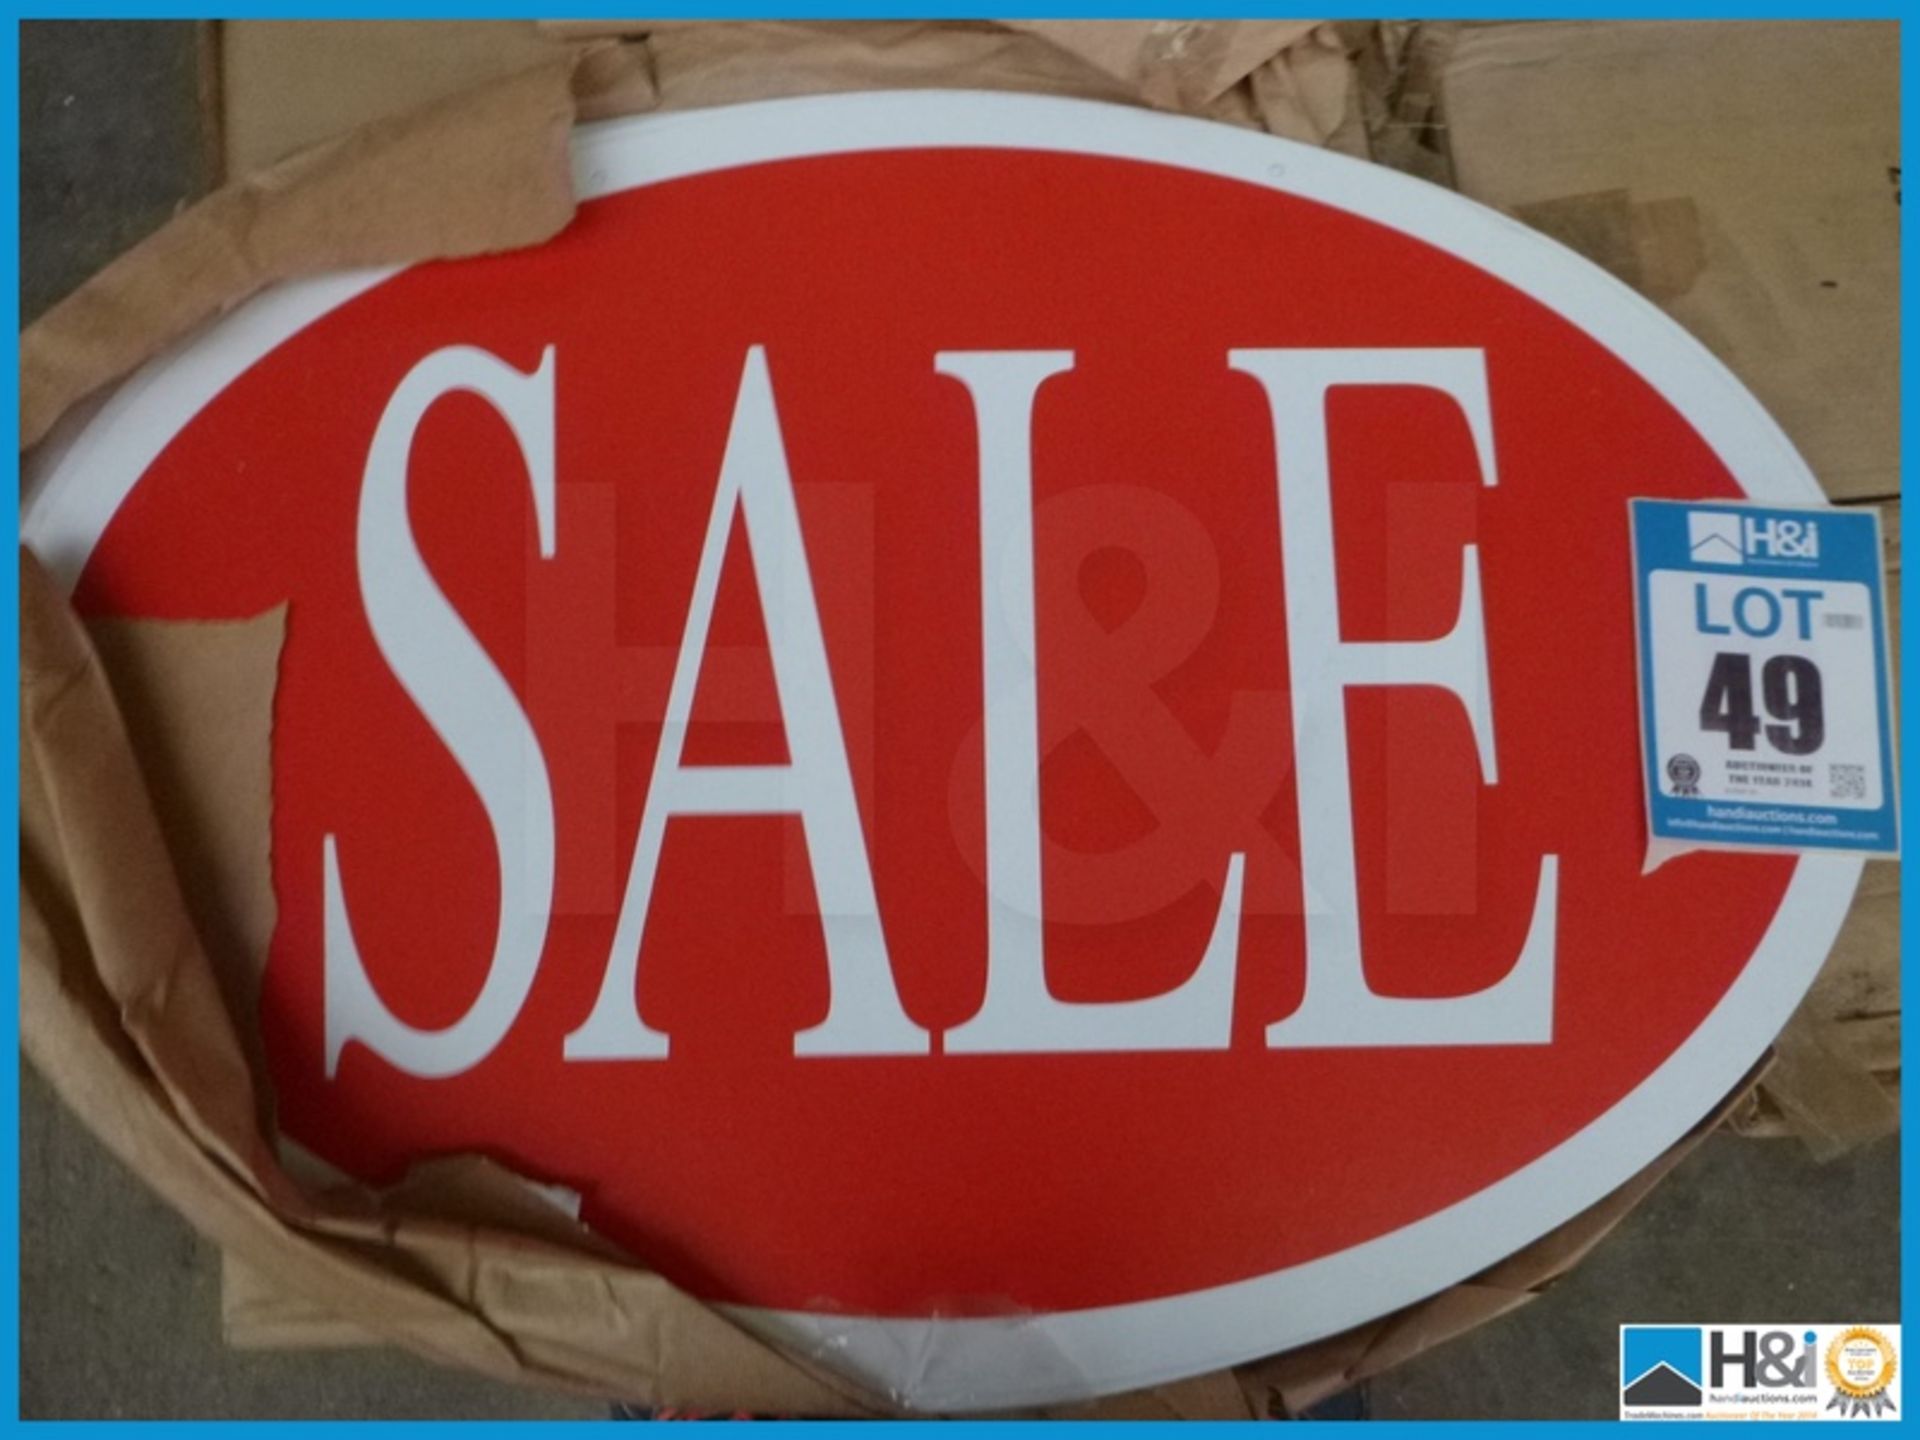 PACK OF 'SALE' SIGNS, UNUSED Appraisal: Viewing Essential Serial No: NA Location: H&I Ltd., Paul